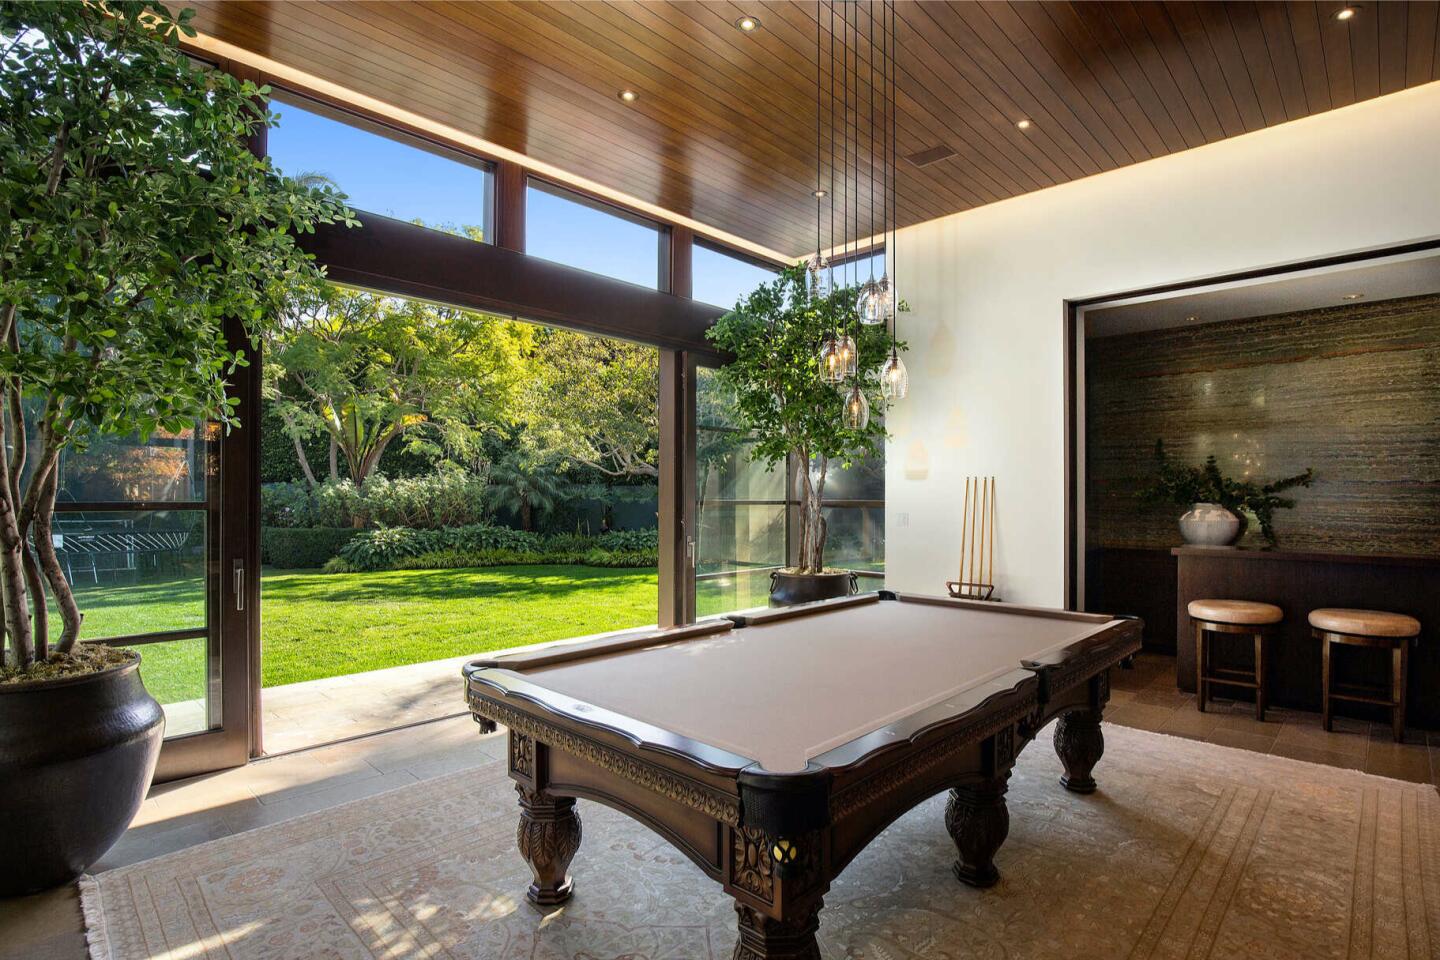 The billiards room with a pool table and glass wall overlooking trees and lawn.